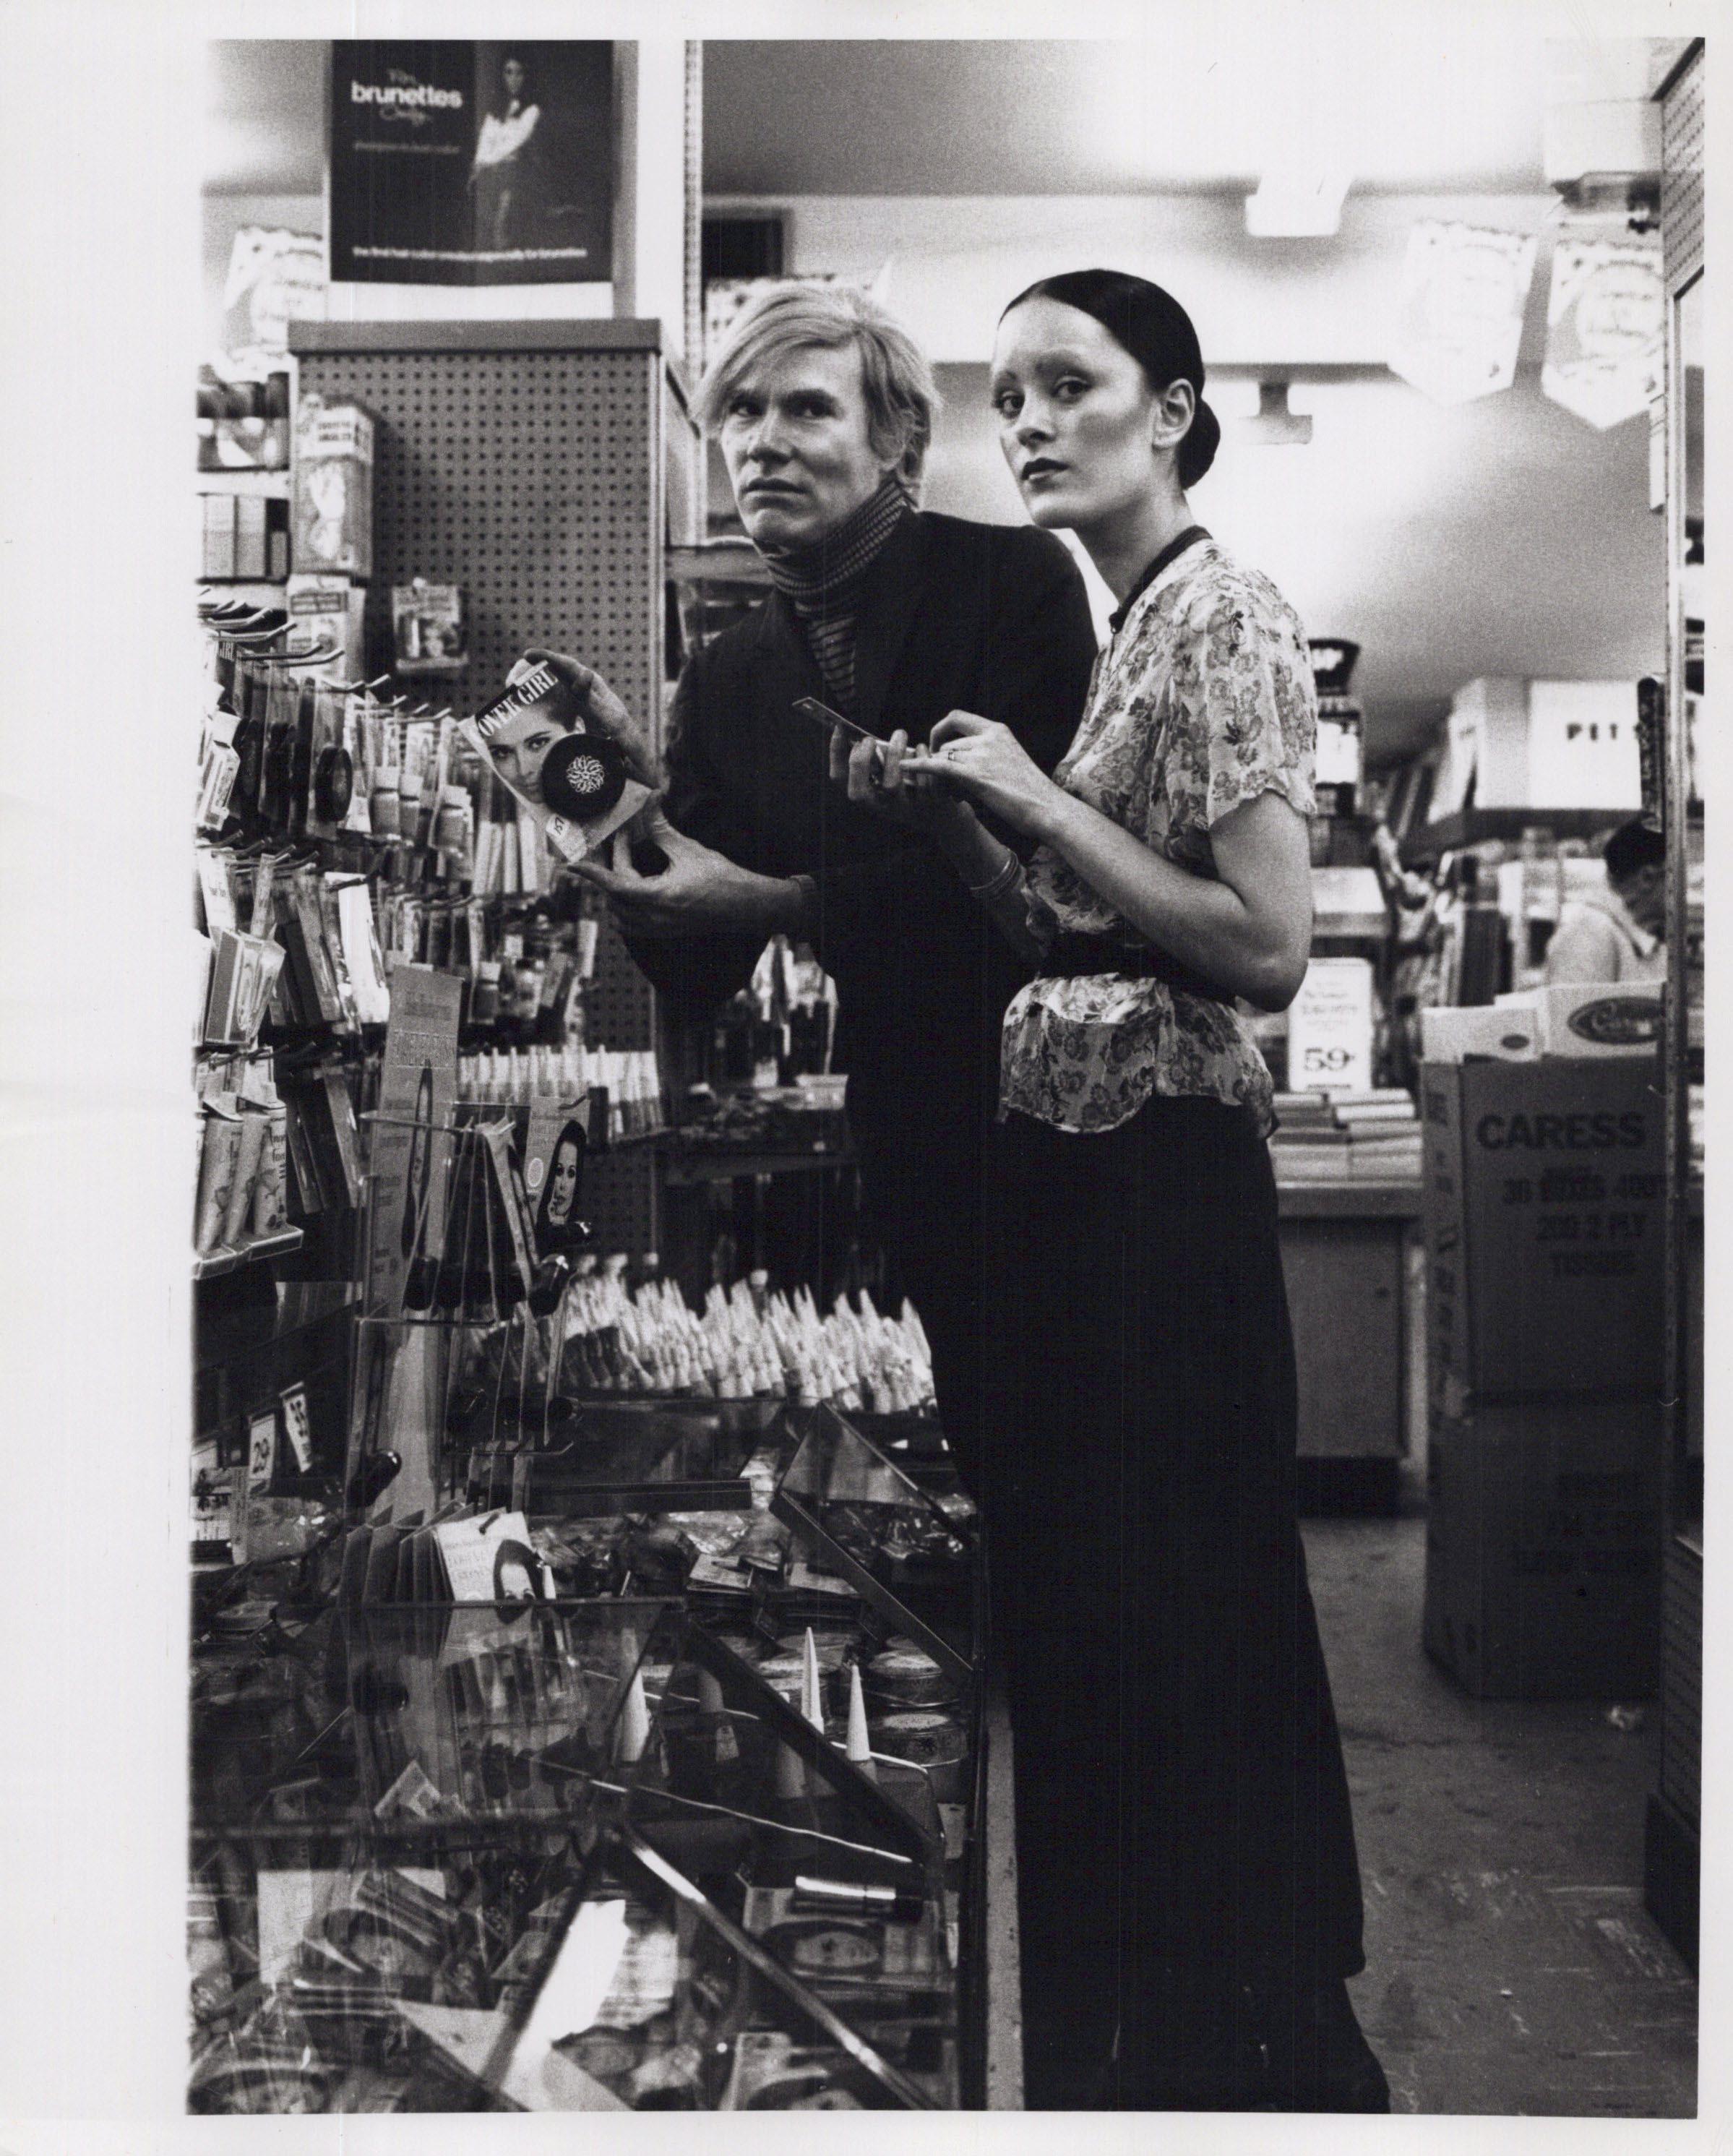 Jack Mitchell Black and White Photograph - Andy Warhol & Jane Forth Buying Cosmetics in a New York City Drug Store